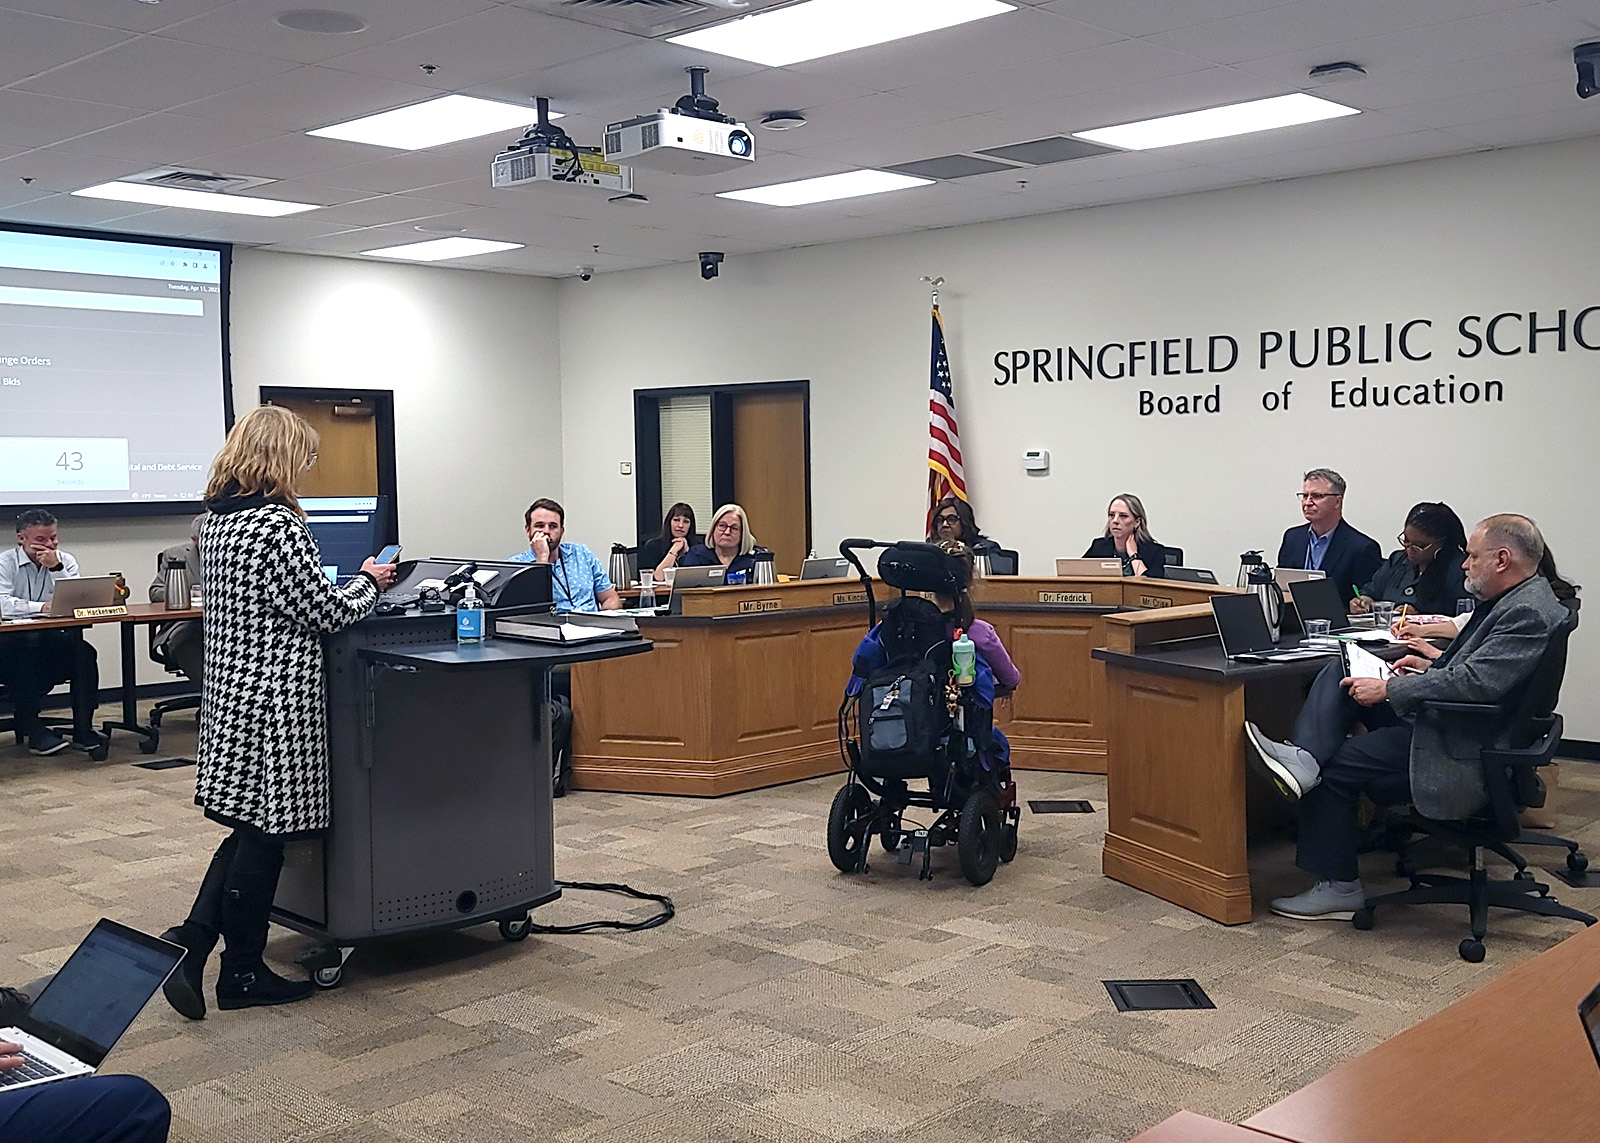 Hourly pay changes concern some SPS employees, and one school board member took unique steps to hear more